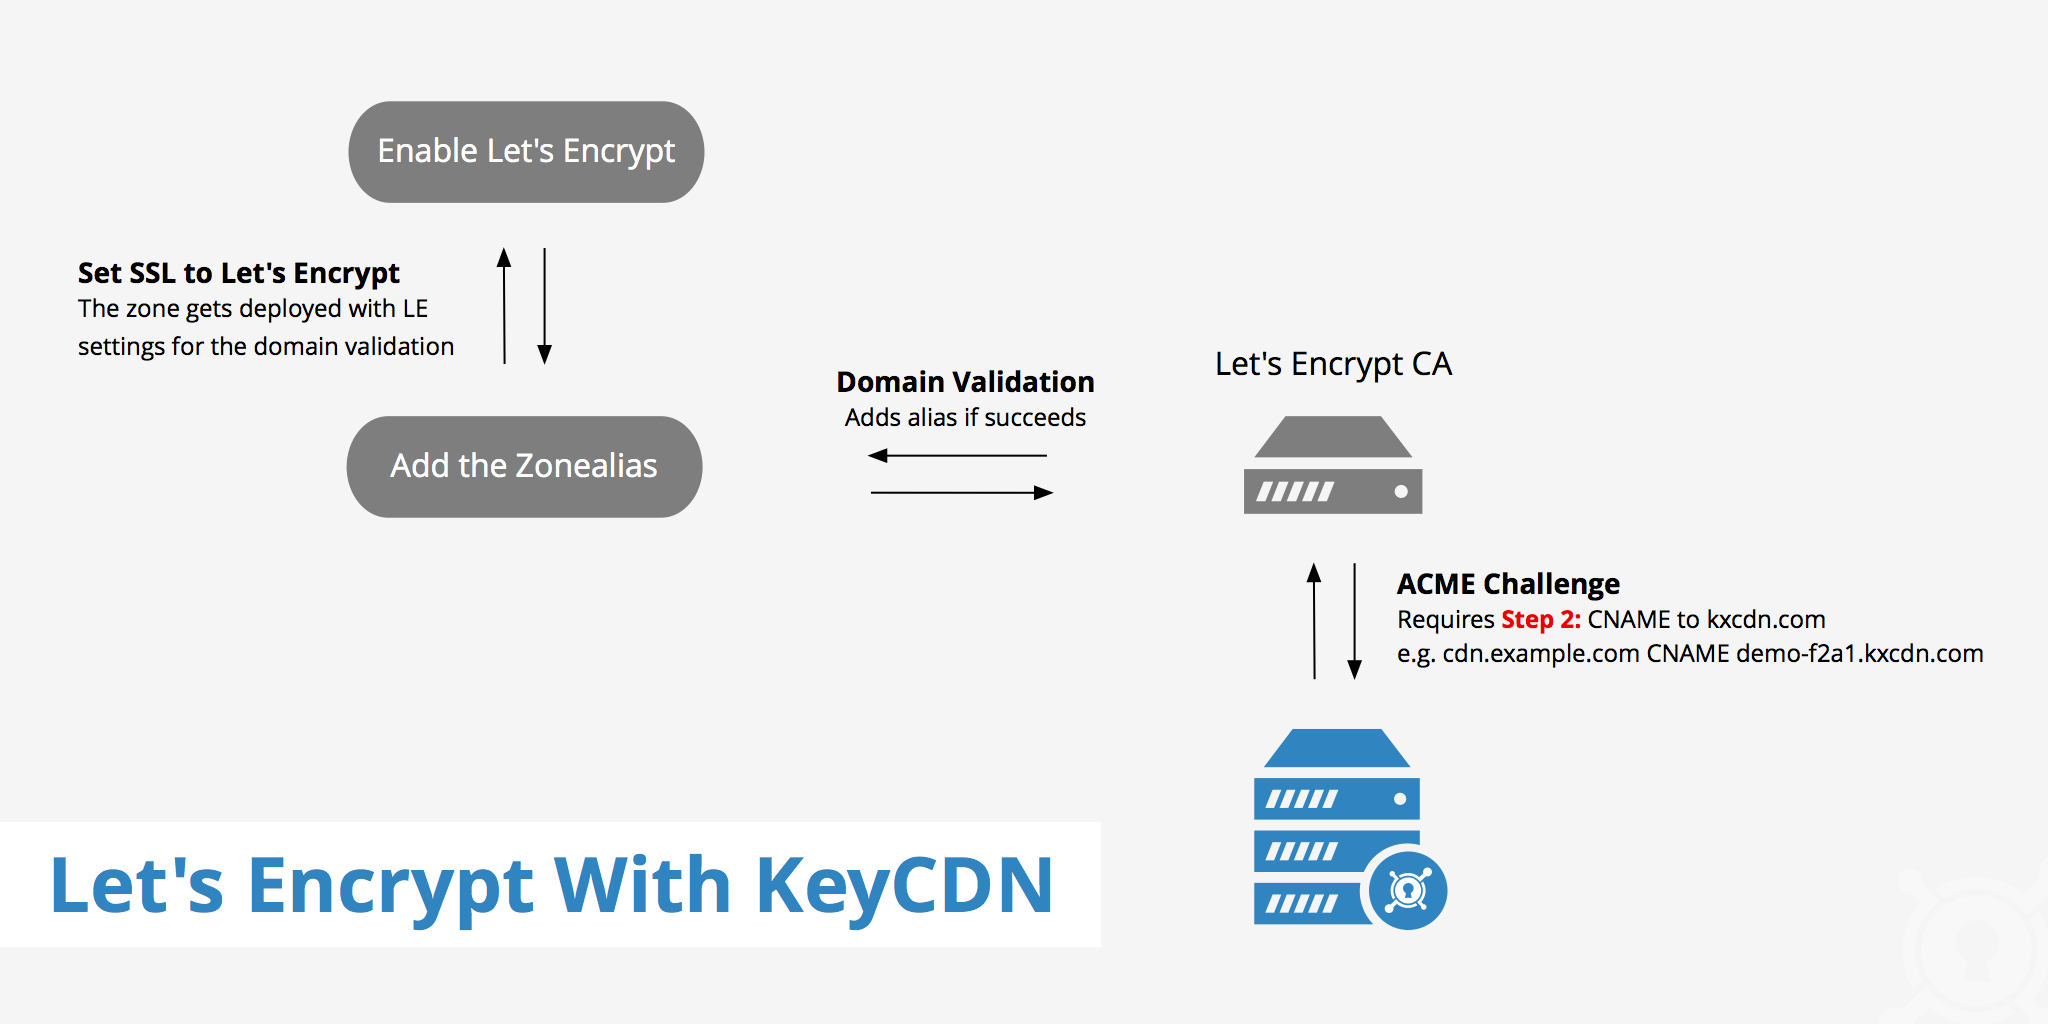 Use Let's Encrypt with KeyCDN to Enable TLS